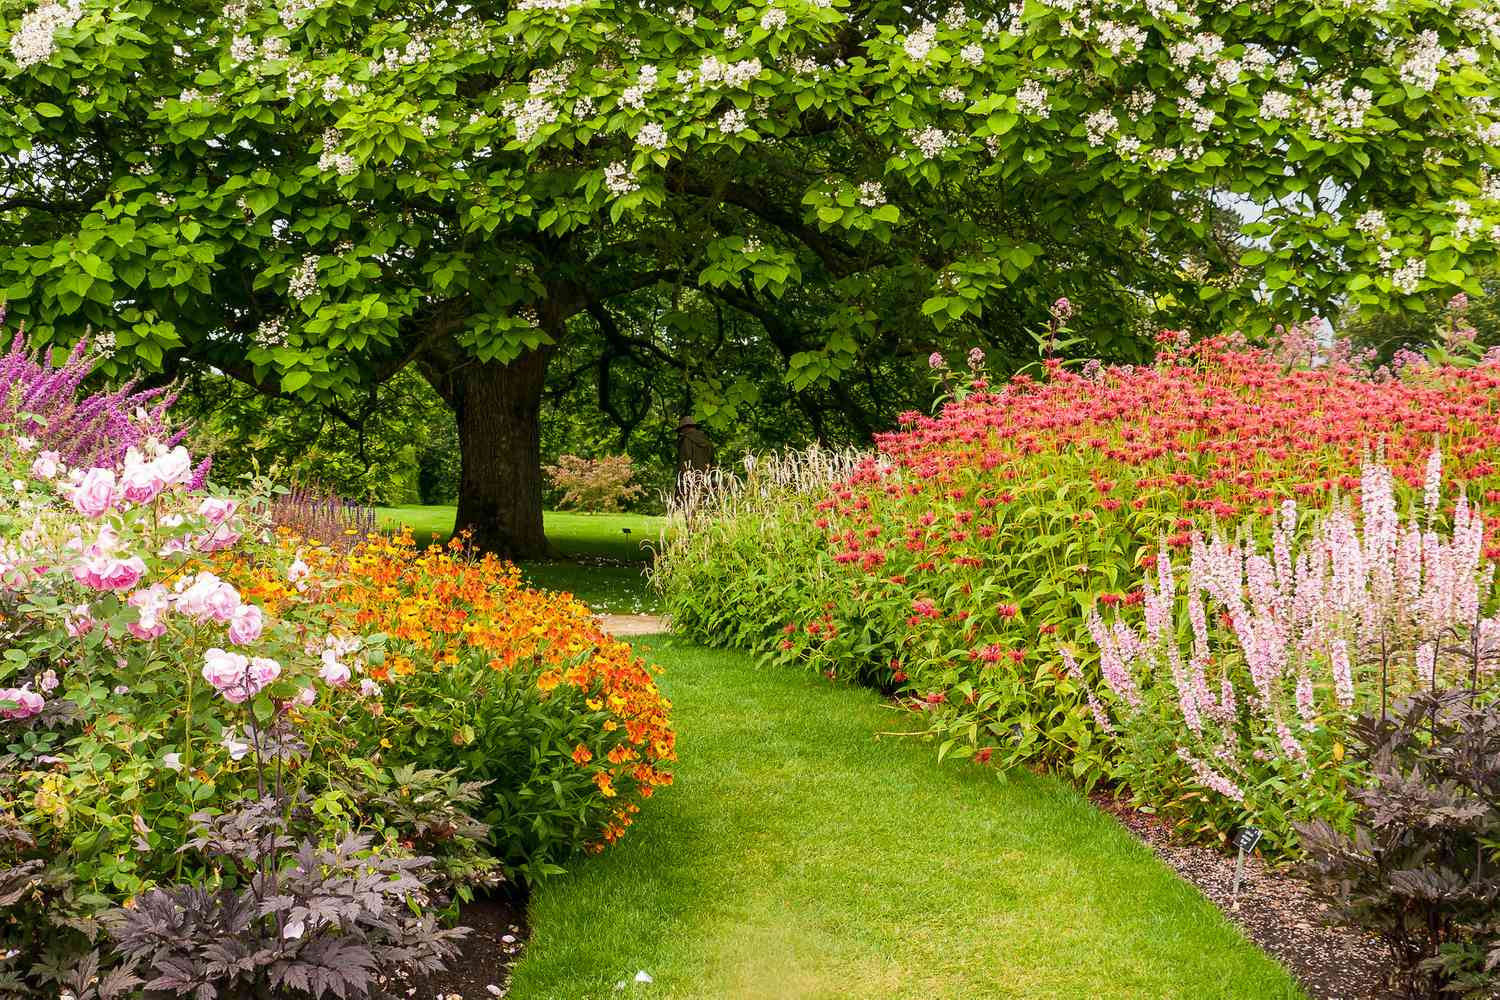 Embracing the Beauty of a Flourishing Flower Garden: A Tranquil Escape from Everyday Life